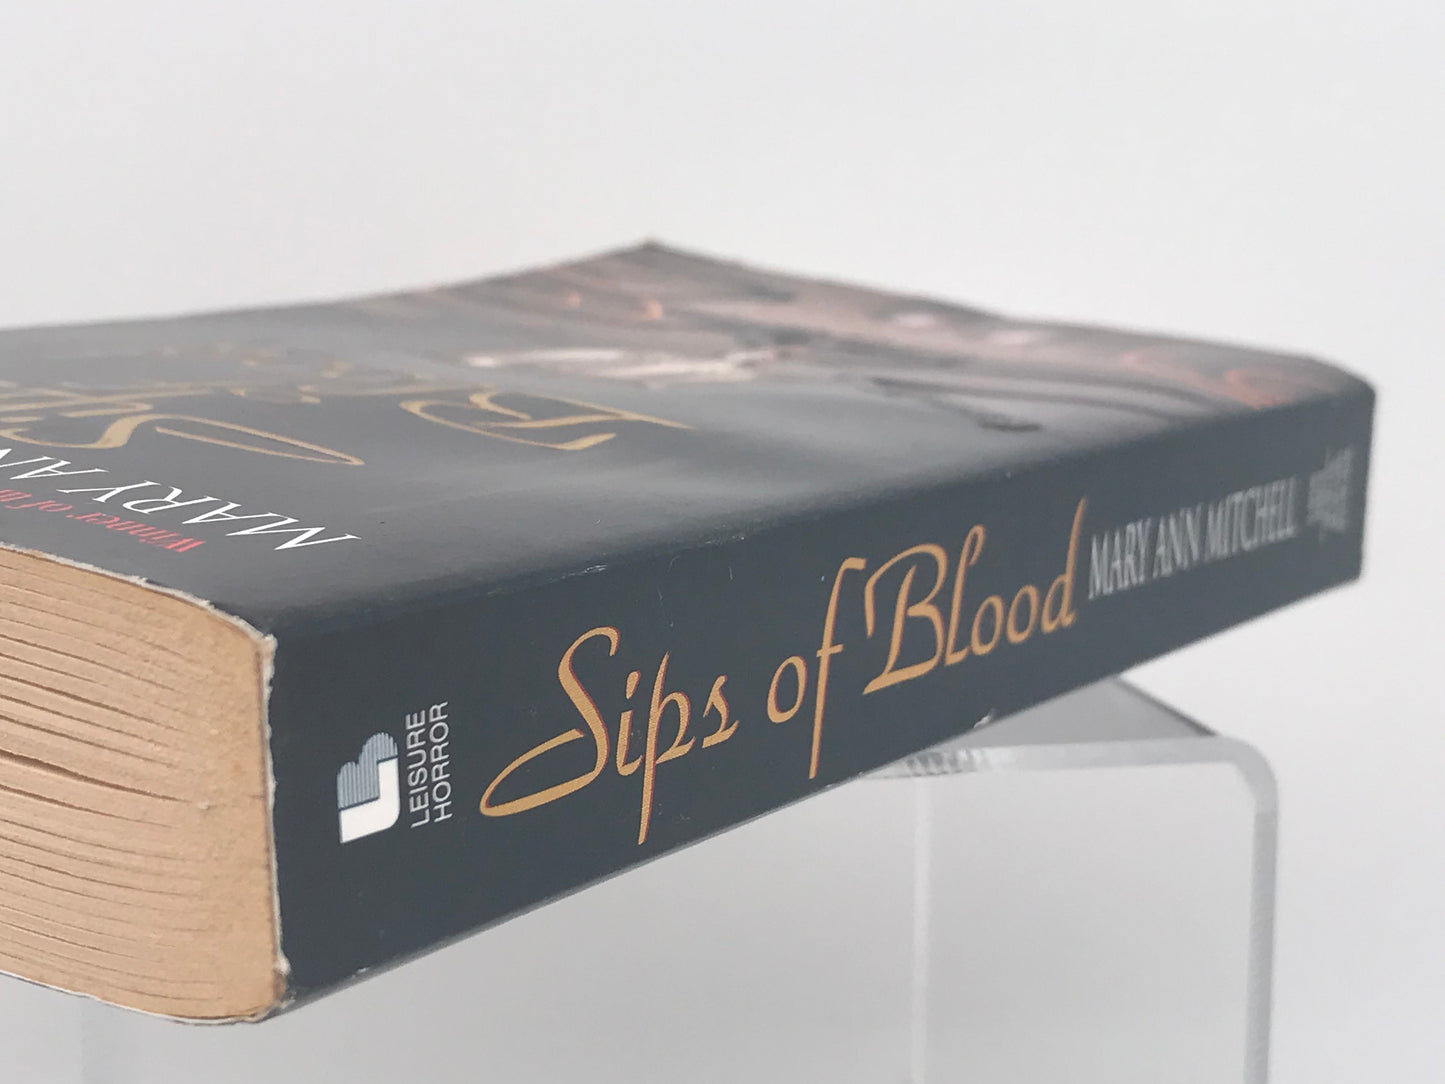 Sips Of Blood LEISURE Paperback Mary Ann Mitchell HSF